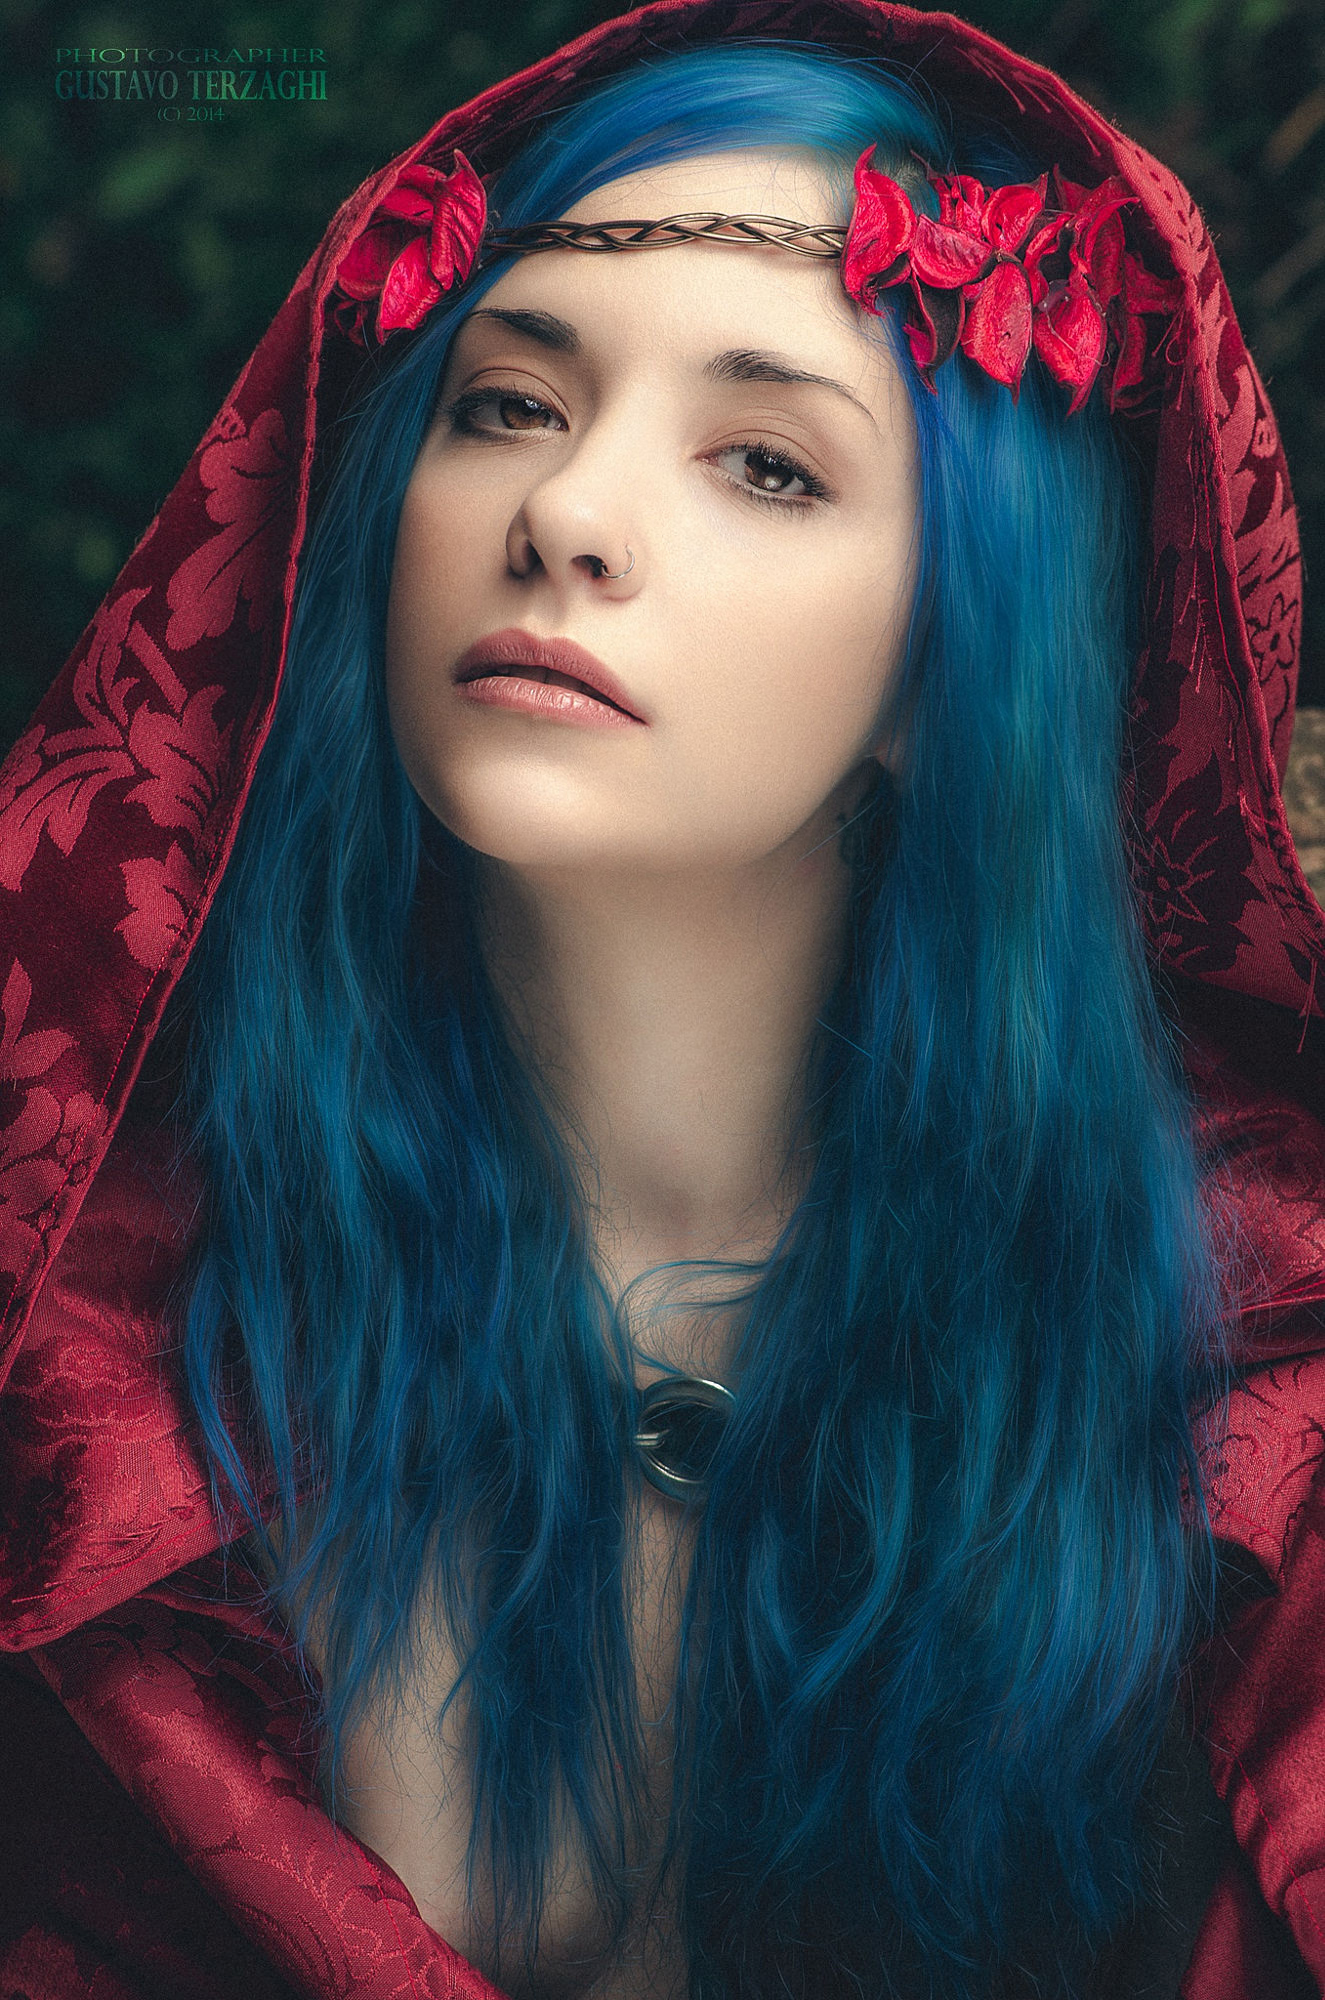 People 1325x2000 Gustavo Terzaghi Saria Suicide women blue hair long hair straight hair hairband red cape portrait pierced nose necklace flowers hoods model naked cape portrait display closeup watermarked